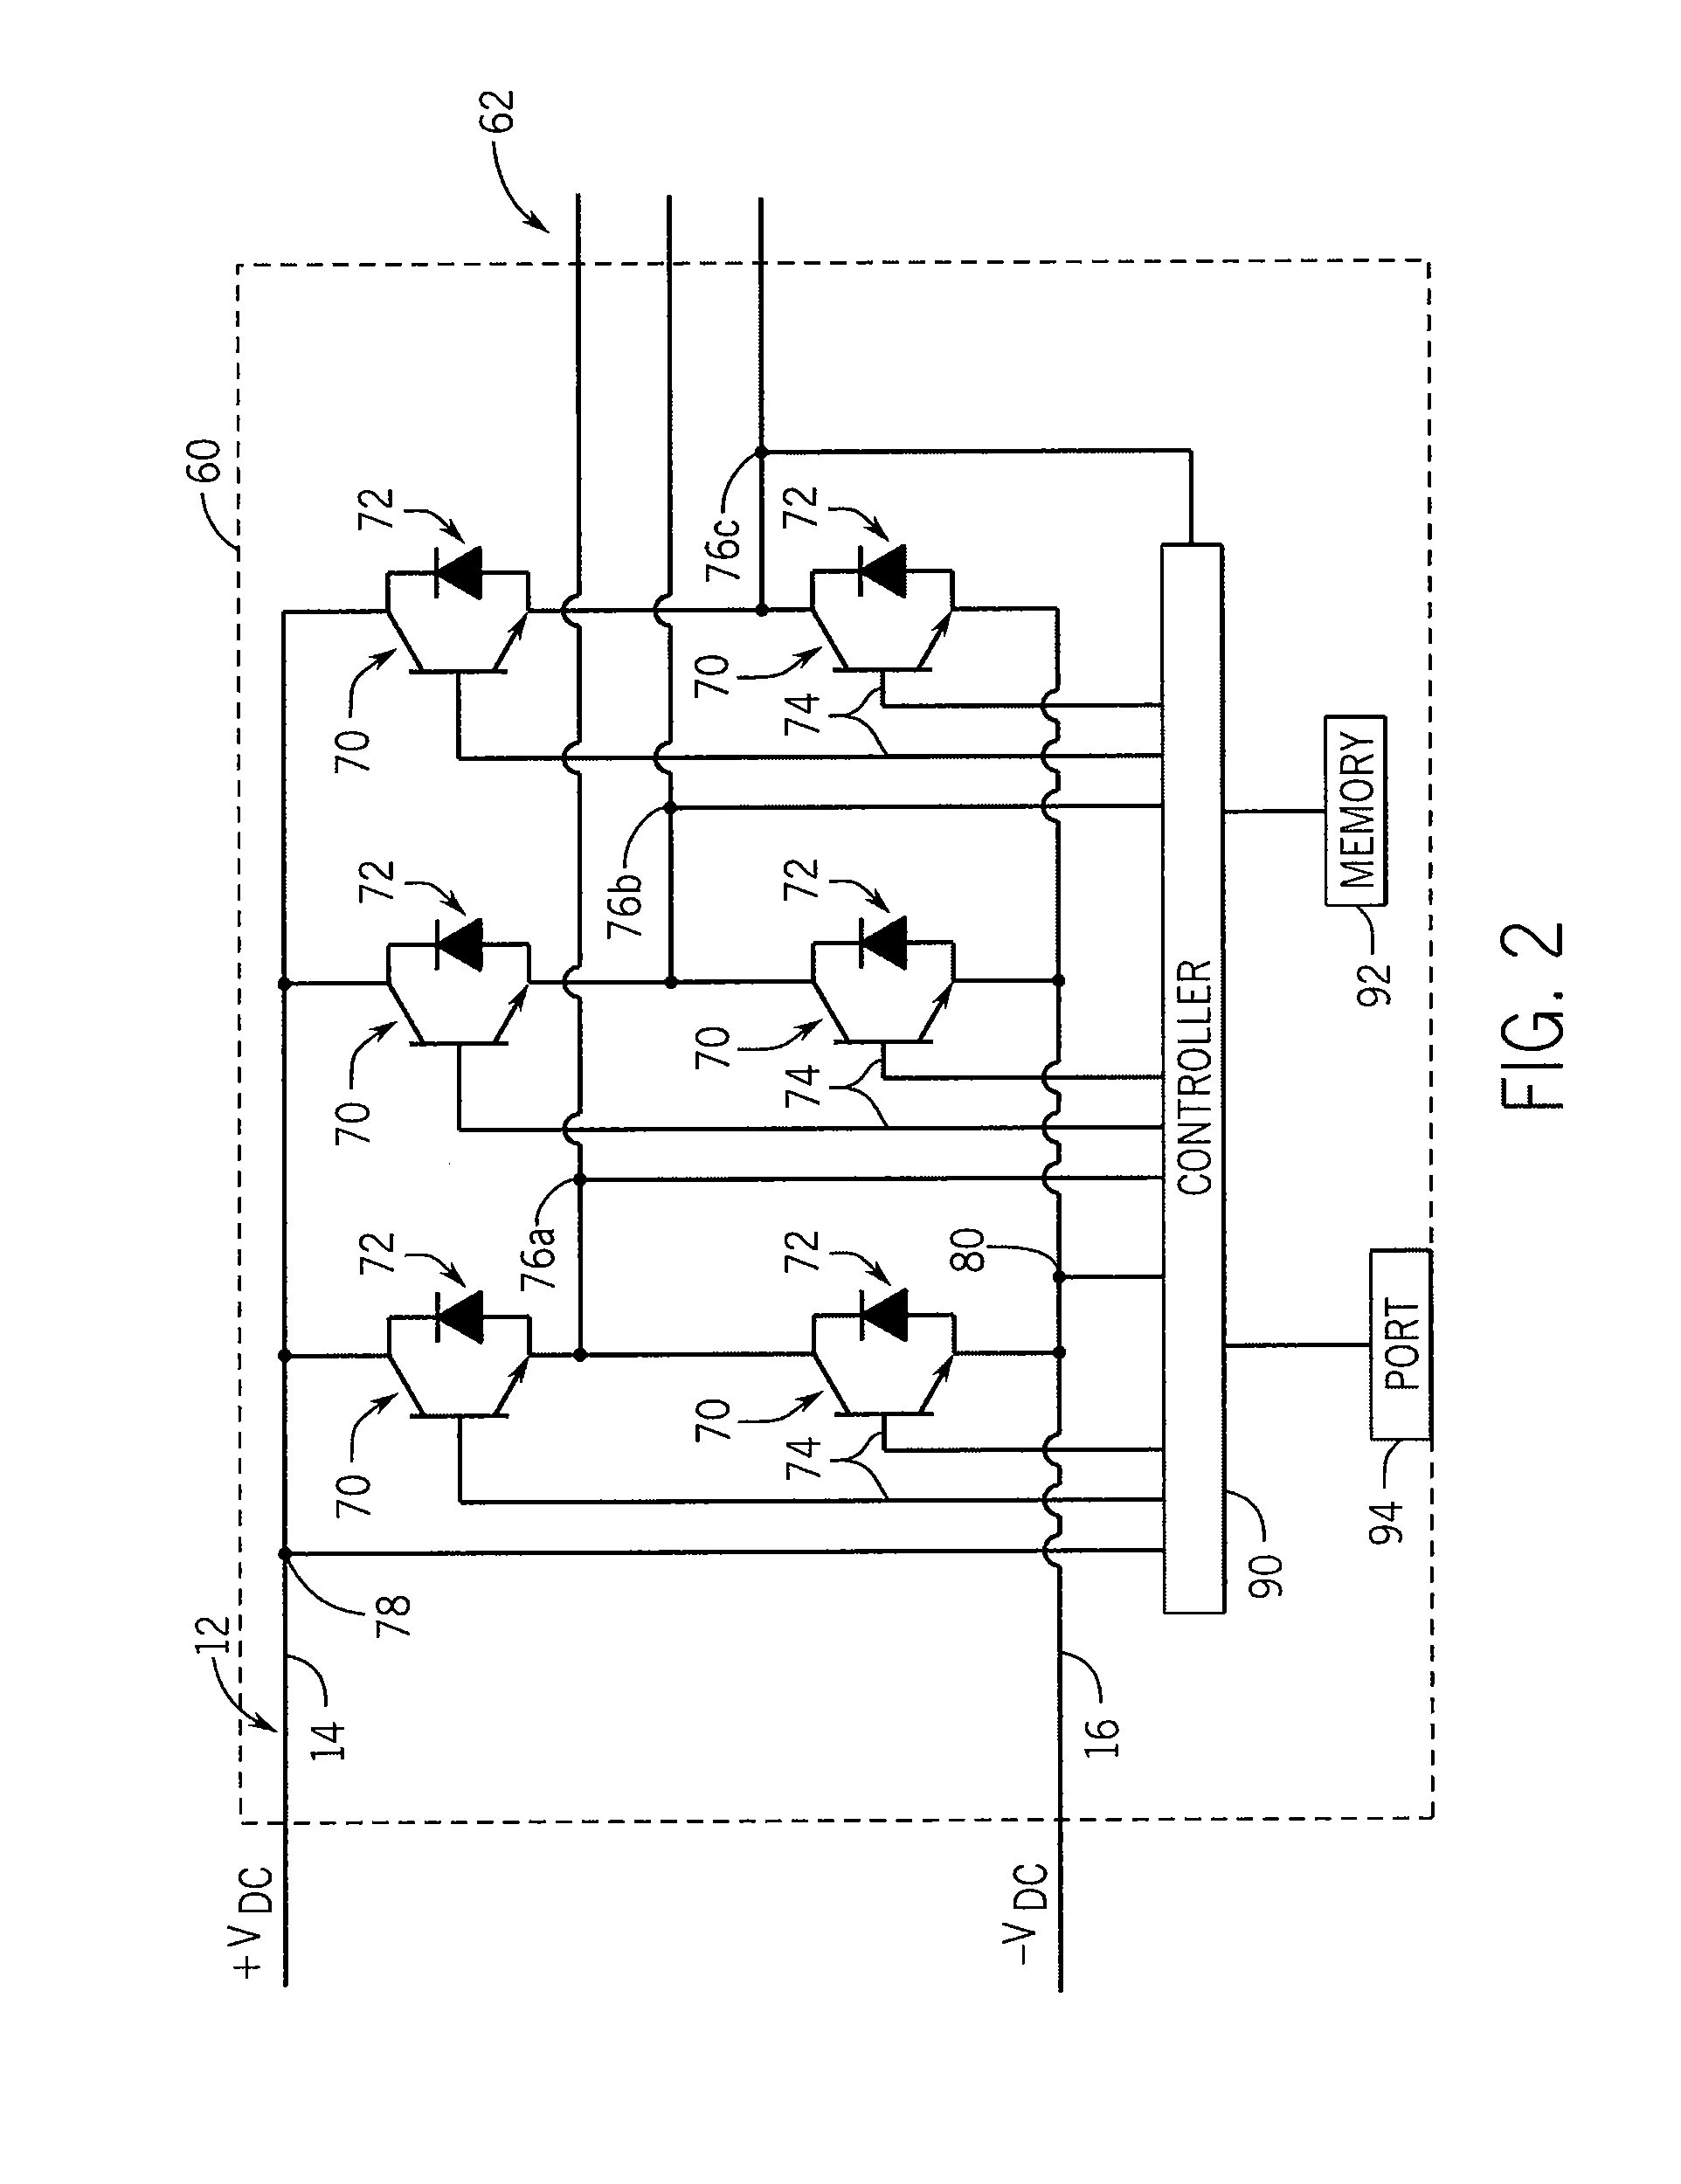 System and method for low speed control of polyphase AC machine